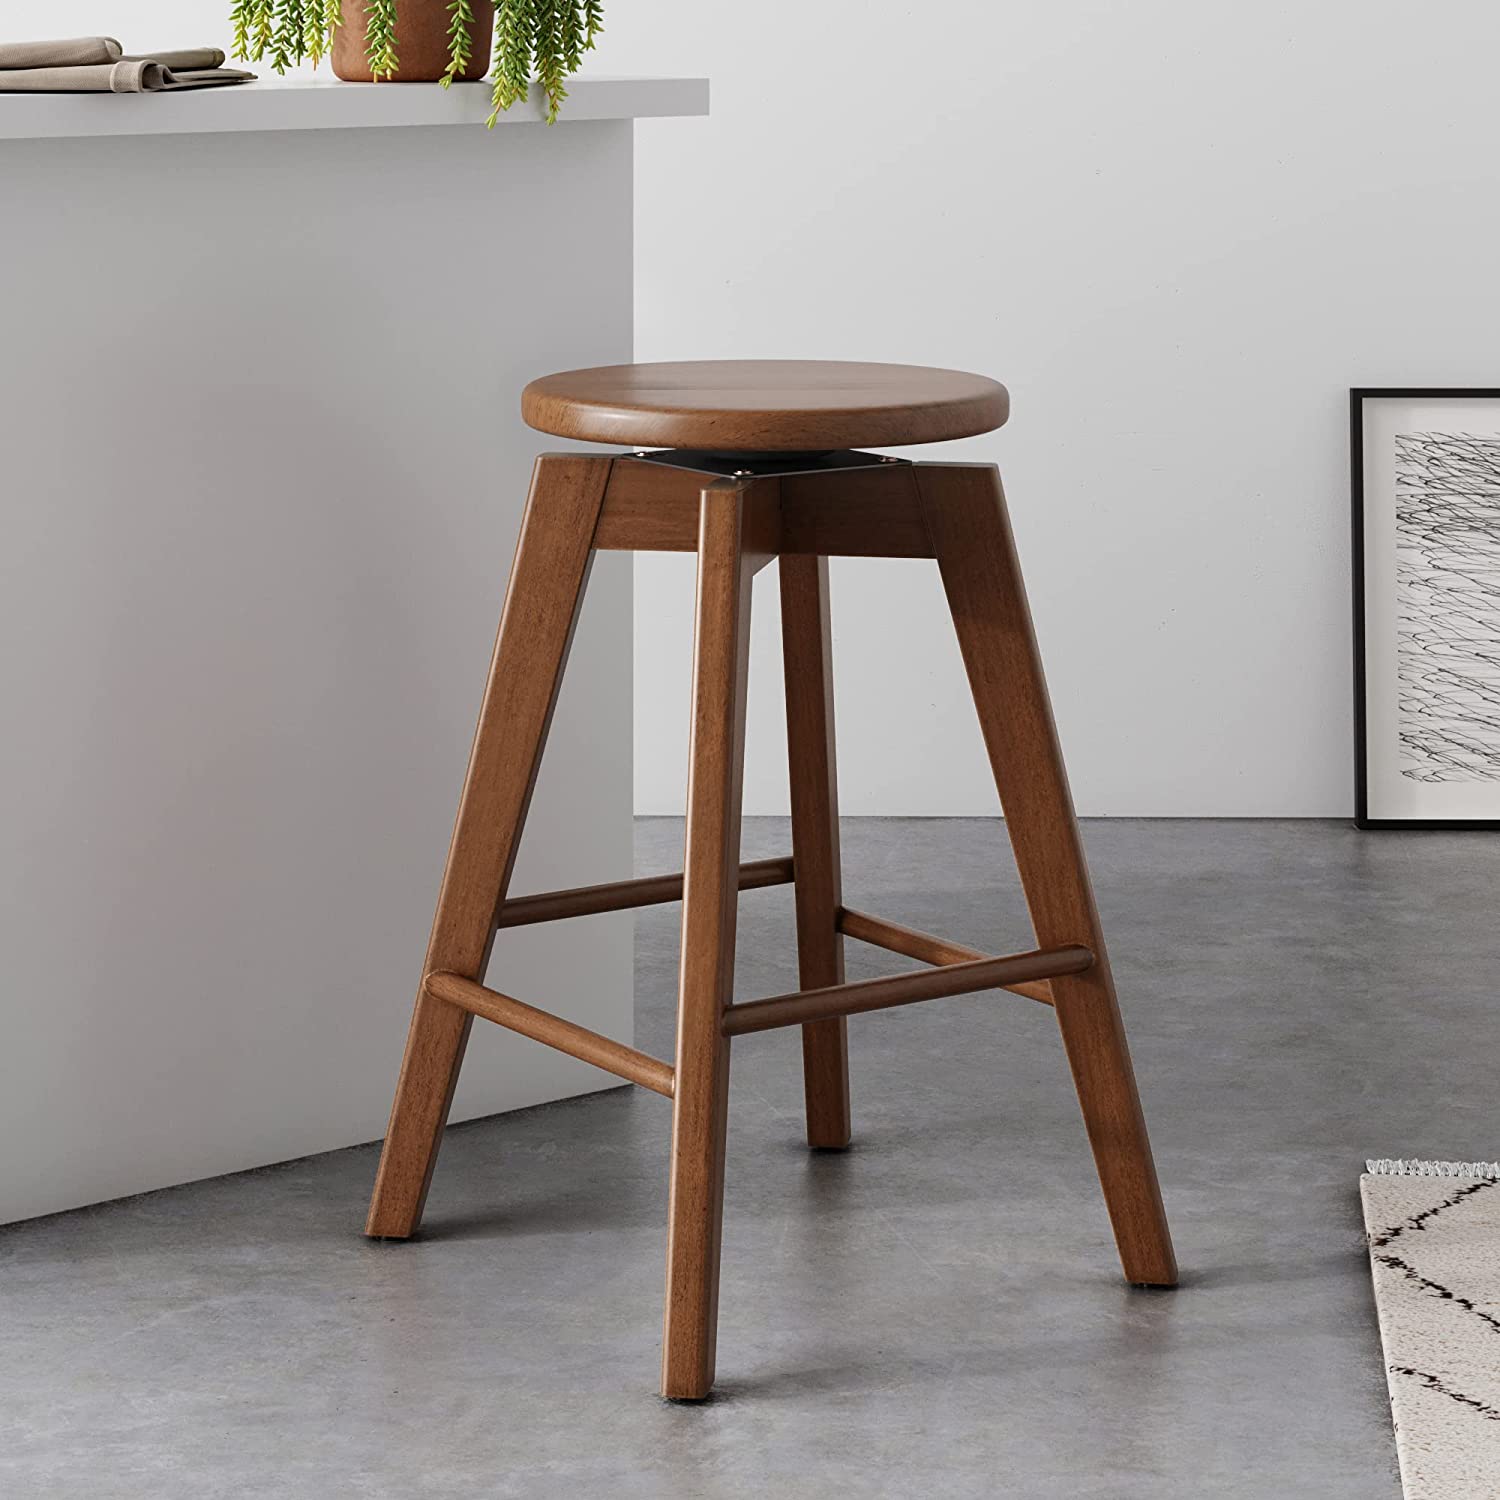 swivel round wooden stool with four legs low kitchen seating for counter height dining chair inspiration round wood stools for sale cheap on amazon solid wood construction brown